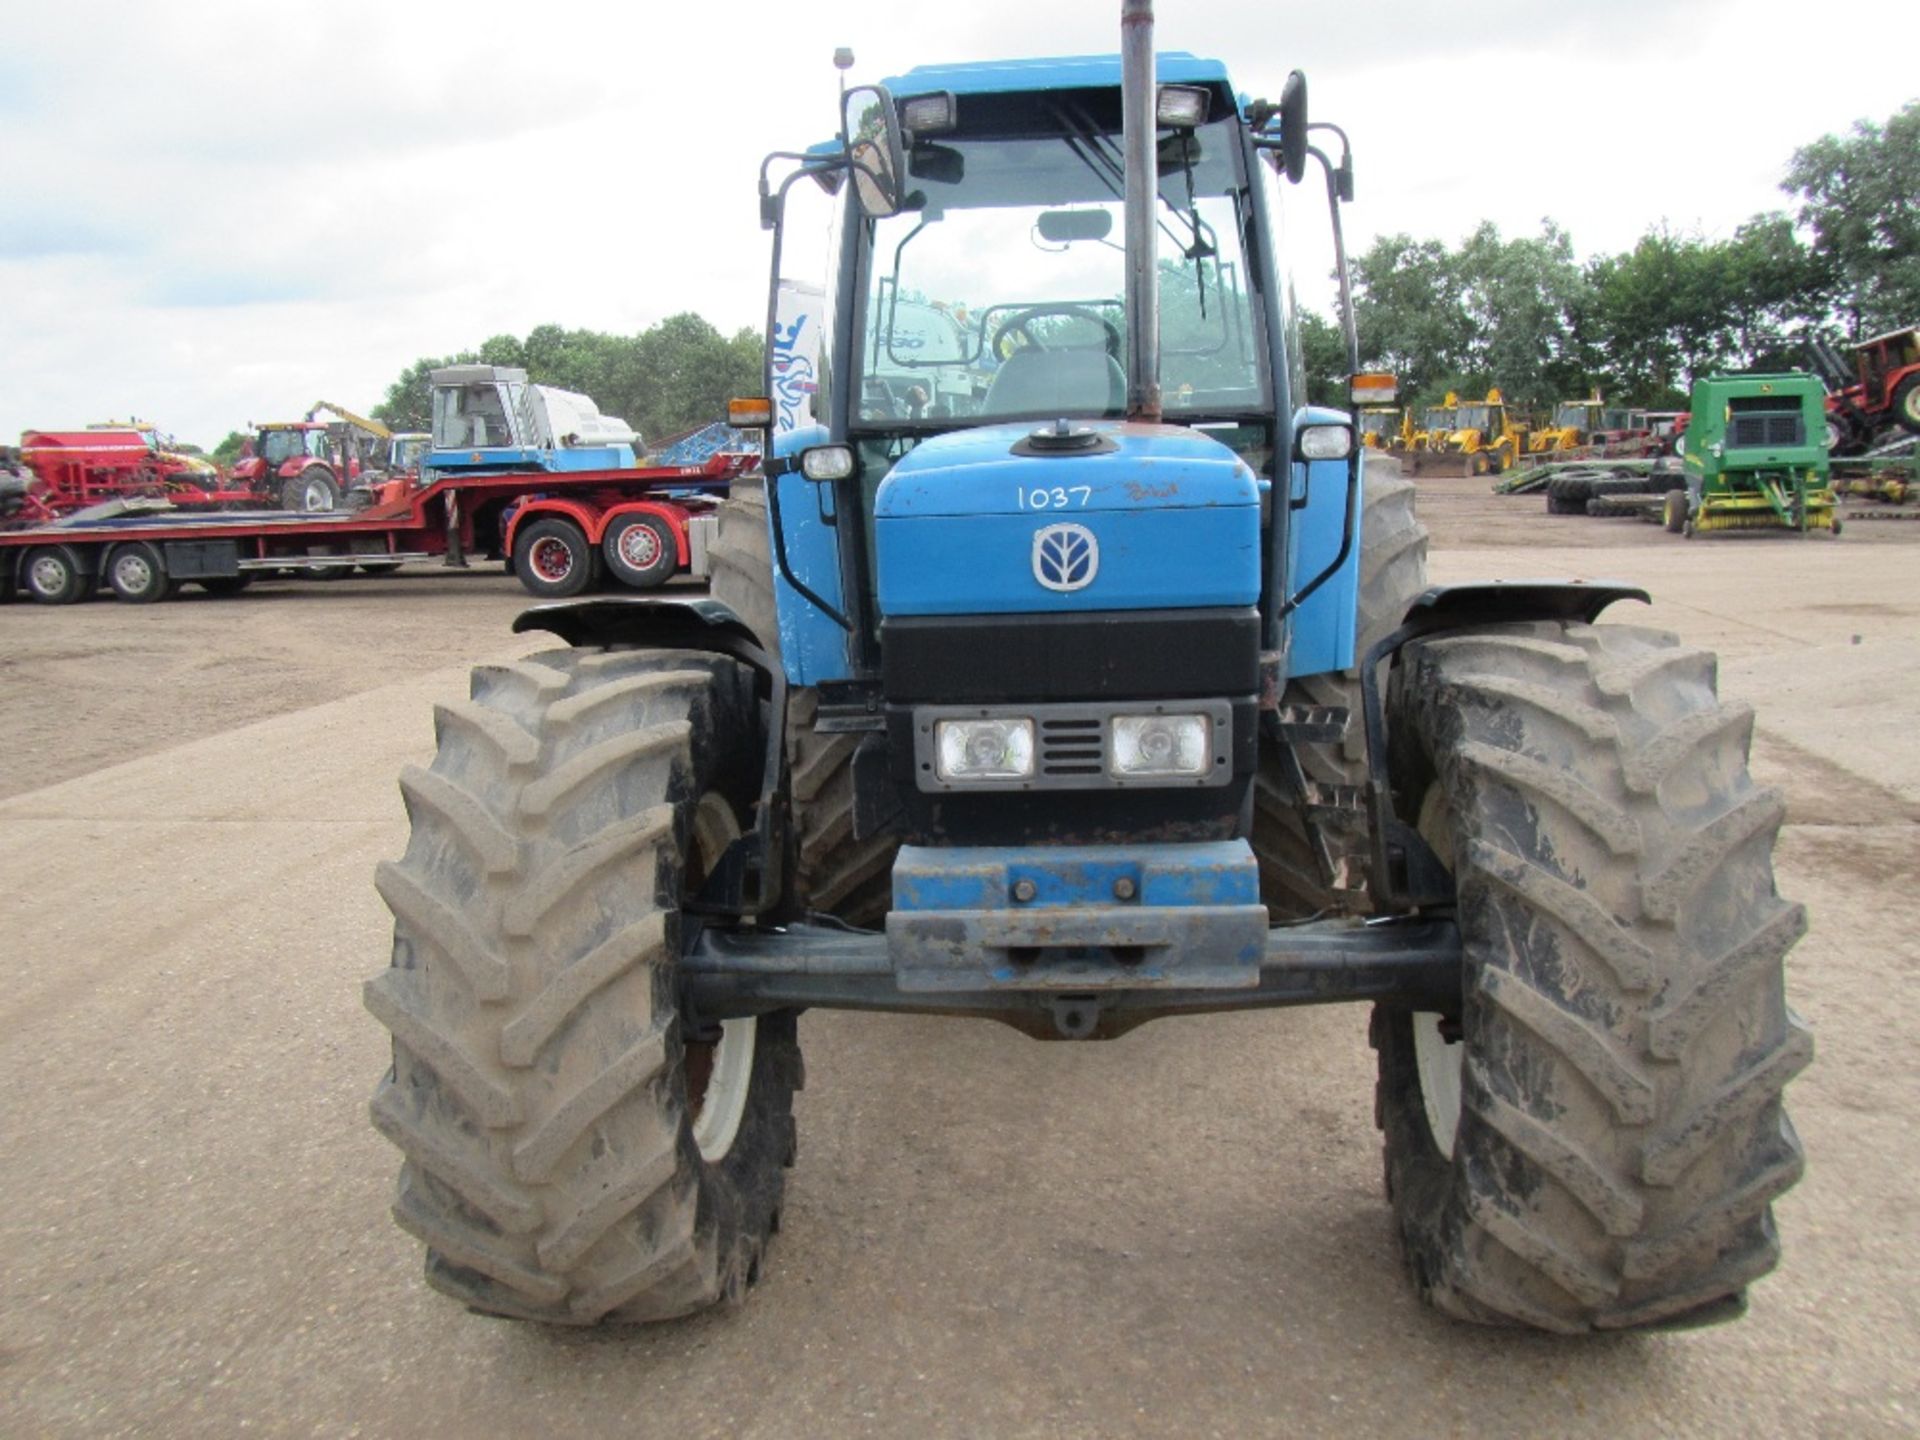 New Holland 8340 SLE 4wd Tractor. Reg. No. N243 SCN Ser. No. 025324B - Image 19 of 20